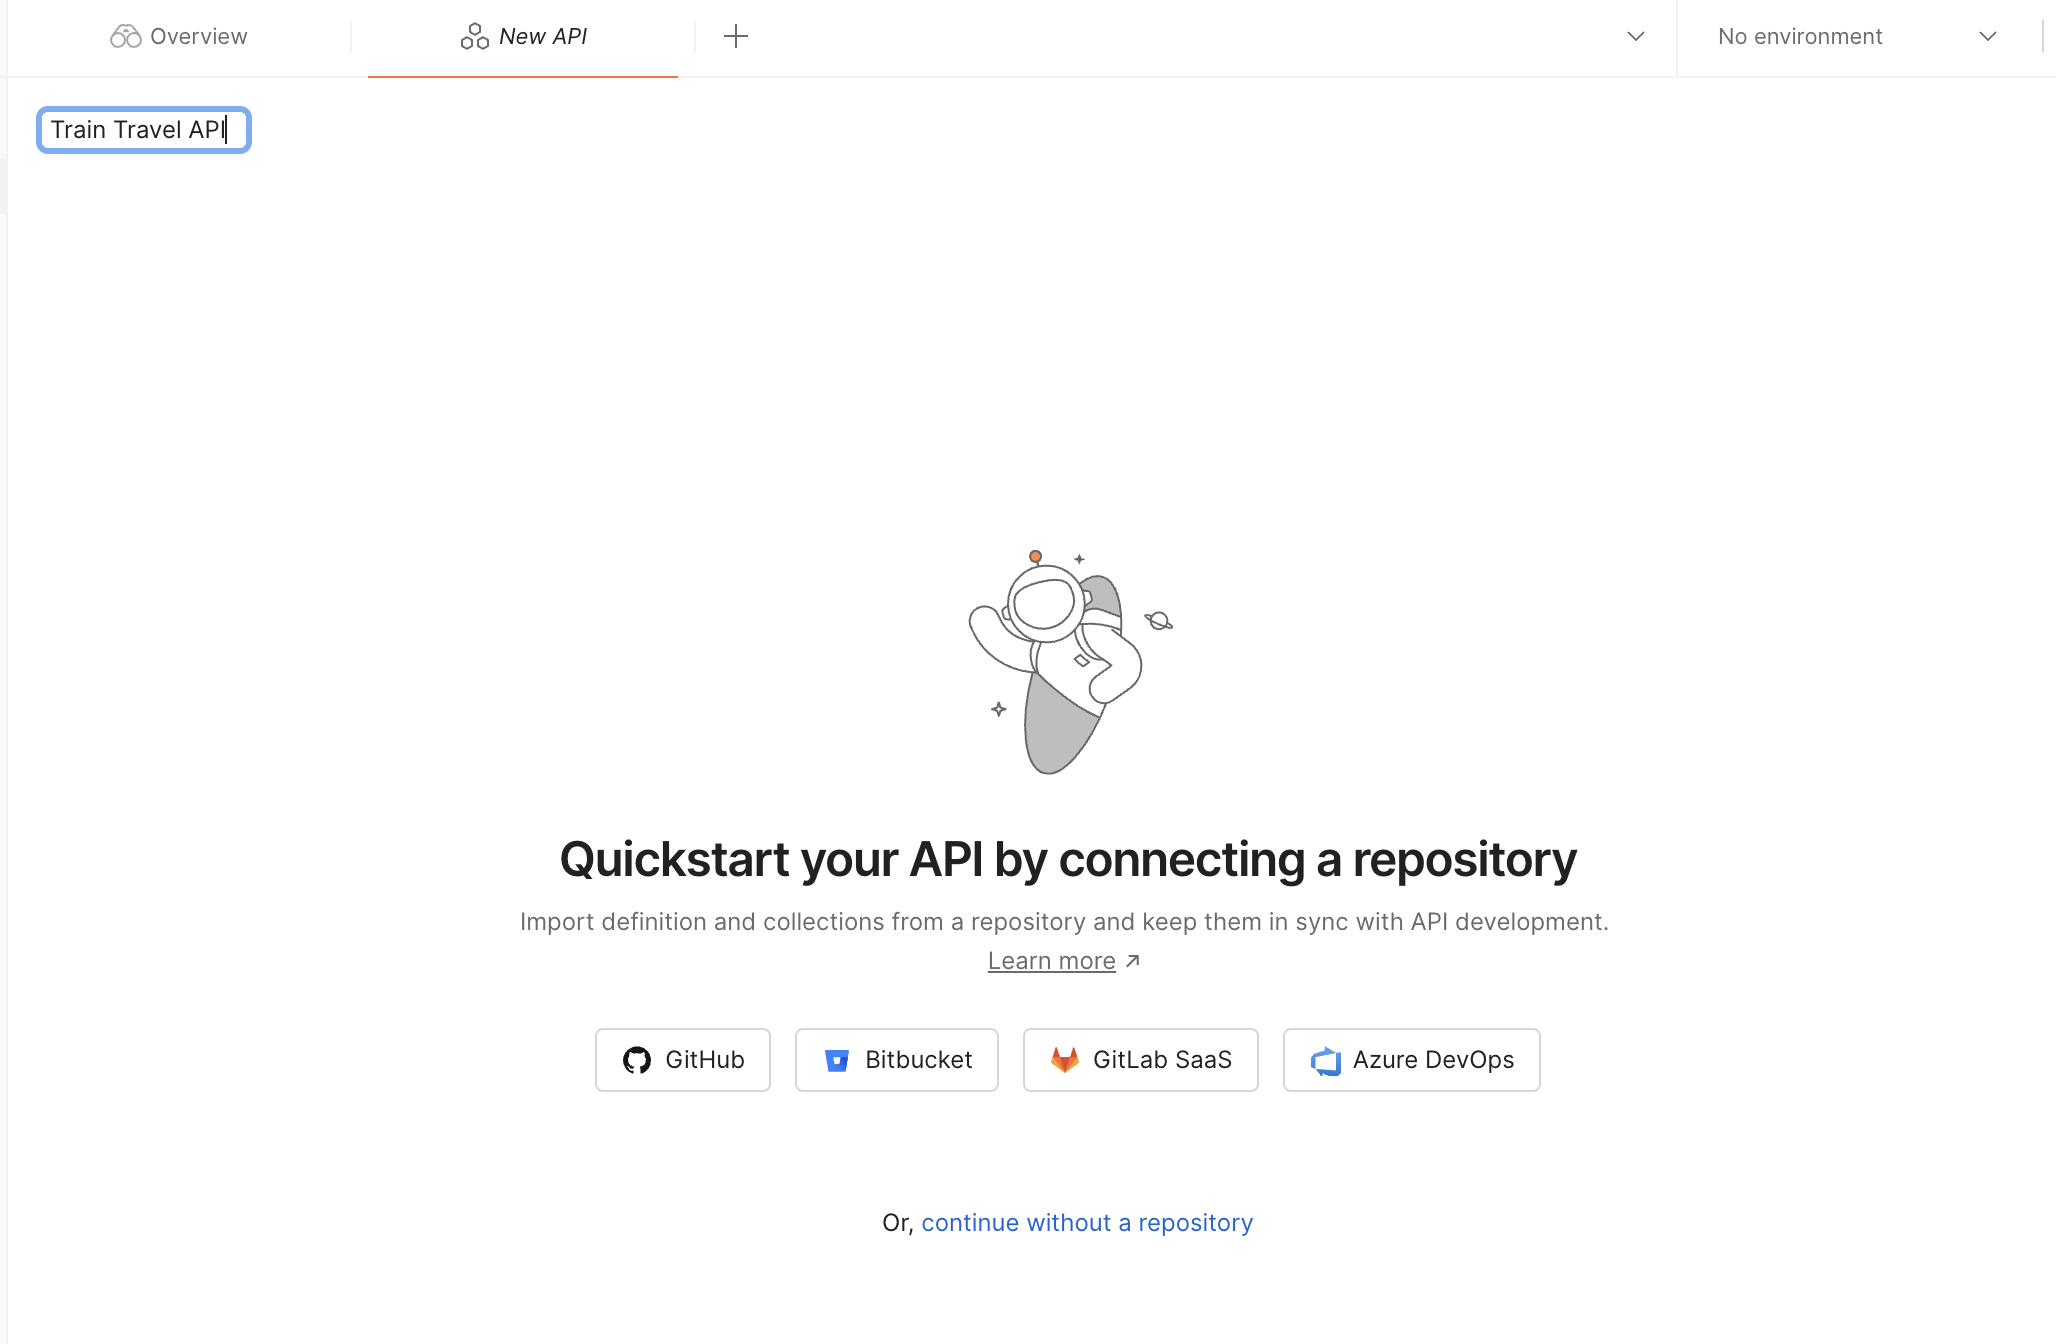 "New API" screen in Postman, showing "Quickstart your API by connecting a repository" and a list of options to connect GitHub, Bitbucket, GitLab SaaS, or Azure DevOps.